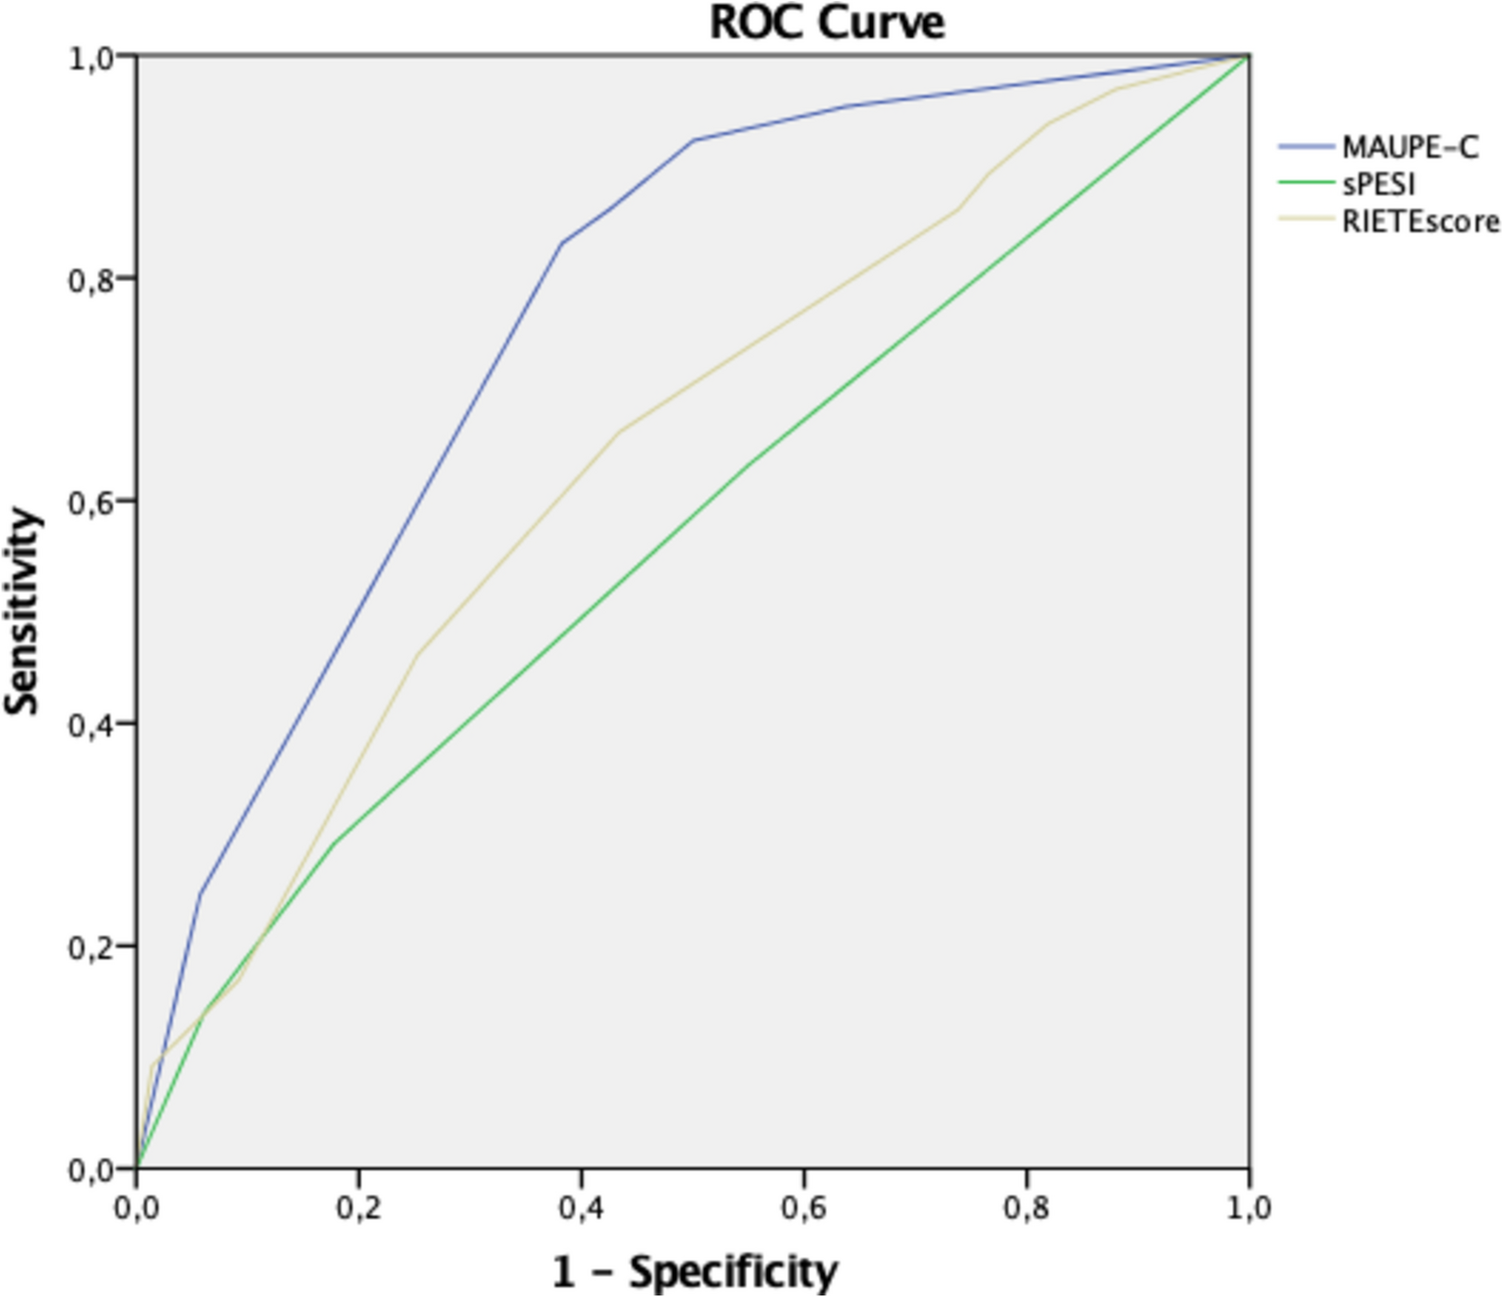 Prediction of mortality in acute pulmonary embolism in cancer-associated thrombosis (MAUPE-C): derivation and validation of a multivariable model